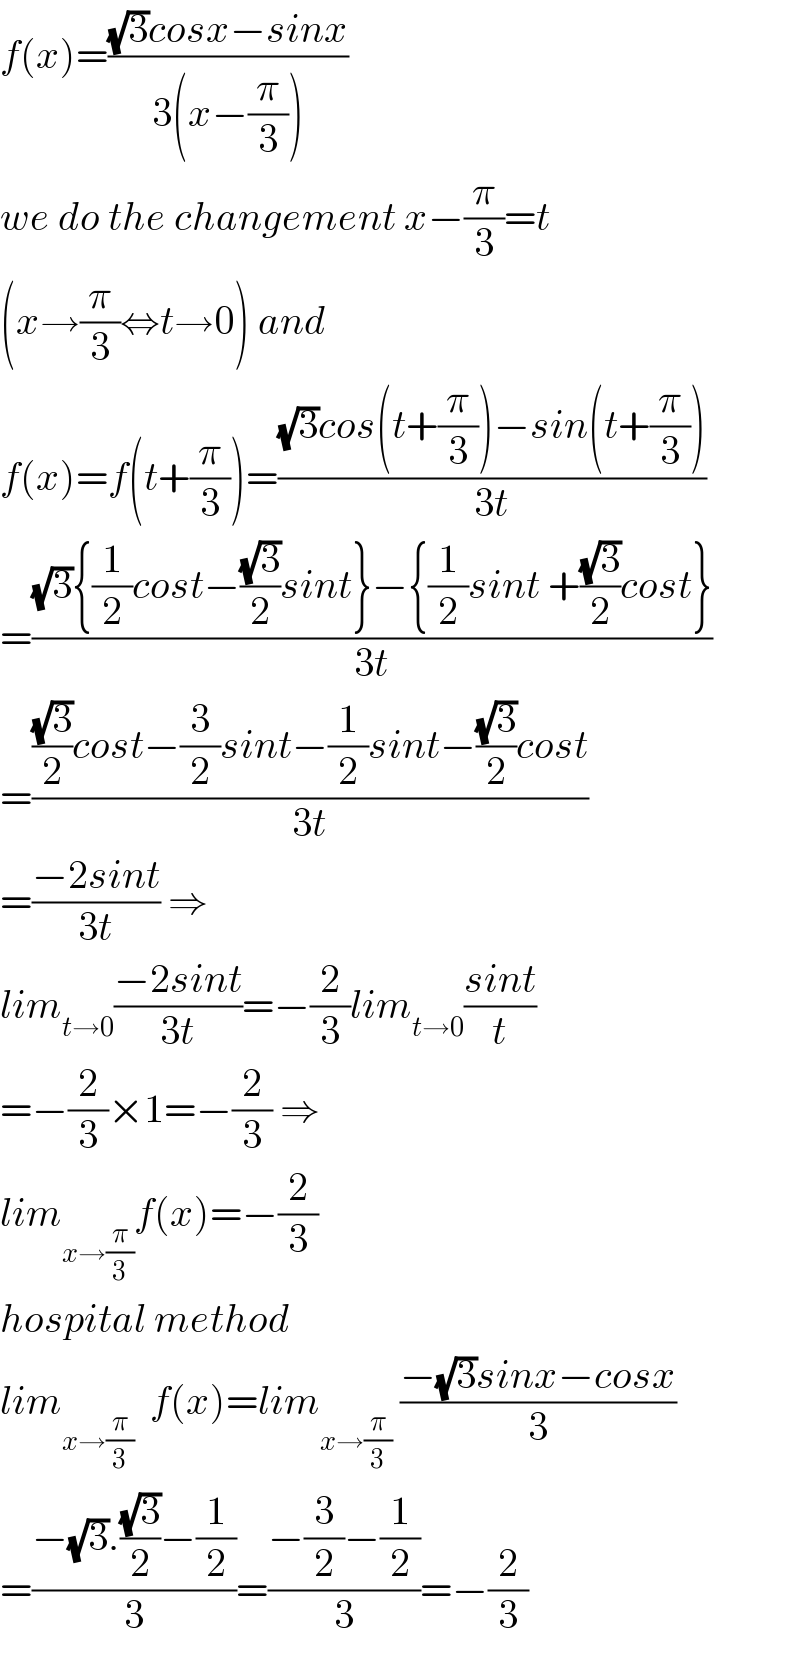 f(x)=(((√3)cosx−sinx)/(3(x−(π/3))))  we do the changement x−(π/3)=t  (x→(π/3)⇔t→0) and  f(x)=f(t+(π/3))=(((√3)cos(t+(π/3))−sin(t+(π/3)))/(3t))  =(((√3){(1/2)cost−((√3)/2)sint}−{(1/2)sint +((√3)/2)cost})/(3t))  =((((√3)/2)cost−(3/2)sint−(1/2)sint−((√3)/2)cost)/(3t))  =((−2sint)/(3t)) ⇒  lim_(t→0) ((−2sint)/(3t))=−(2/3)lim_(t→0) ((sint)/t)  =−(2/3)×1=−(2/3) ⇒  lim_(x→(π/3)) f(x)=−(2/3)  hospital method  lim_(x→(π/3))   f(x)=lim_(x→(π/3))  ((−(√3)sinx−cosx)/3)  =((−(√3).((√3)/2)−(1/2))/3)=((−(3/2)−(1/2))/3)=−(2/3)  